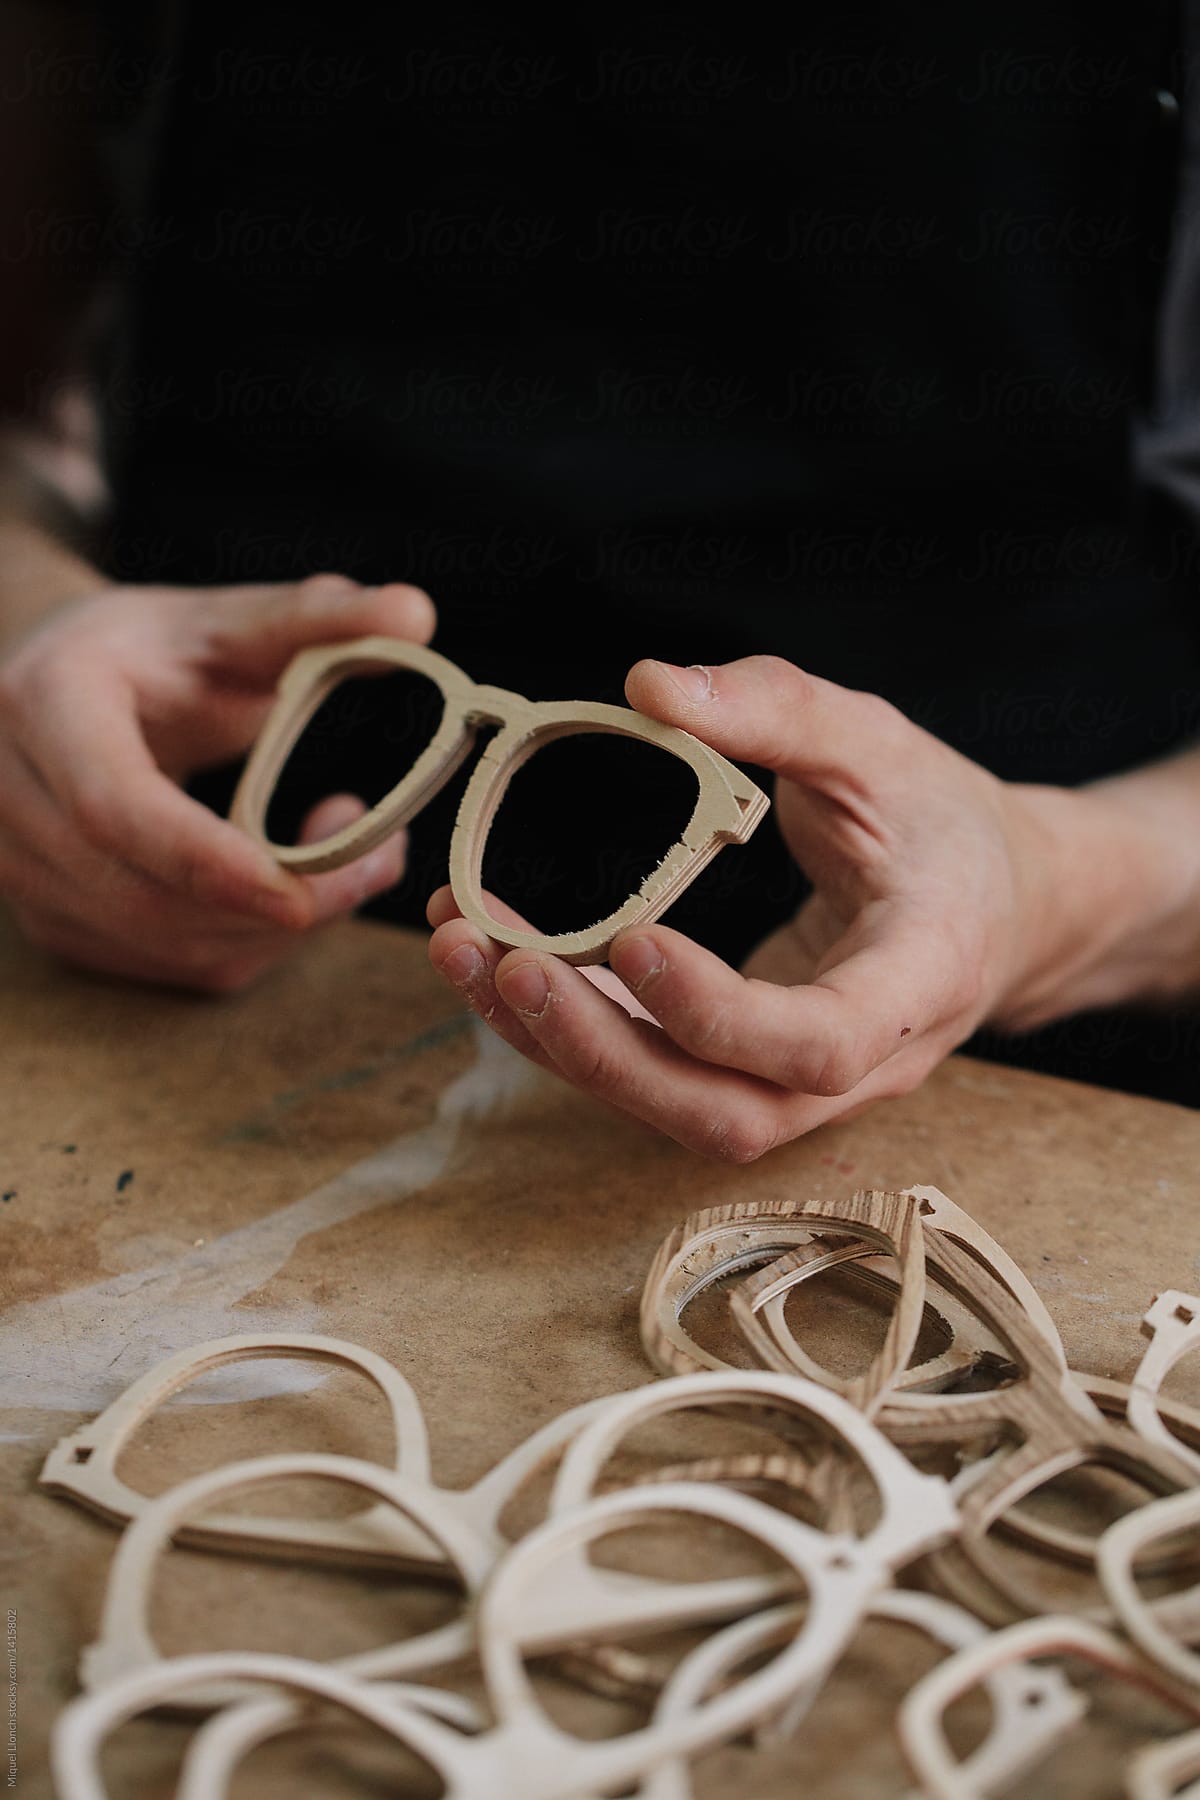 Artisan hands at work with eyeglasses product